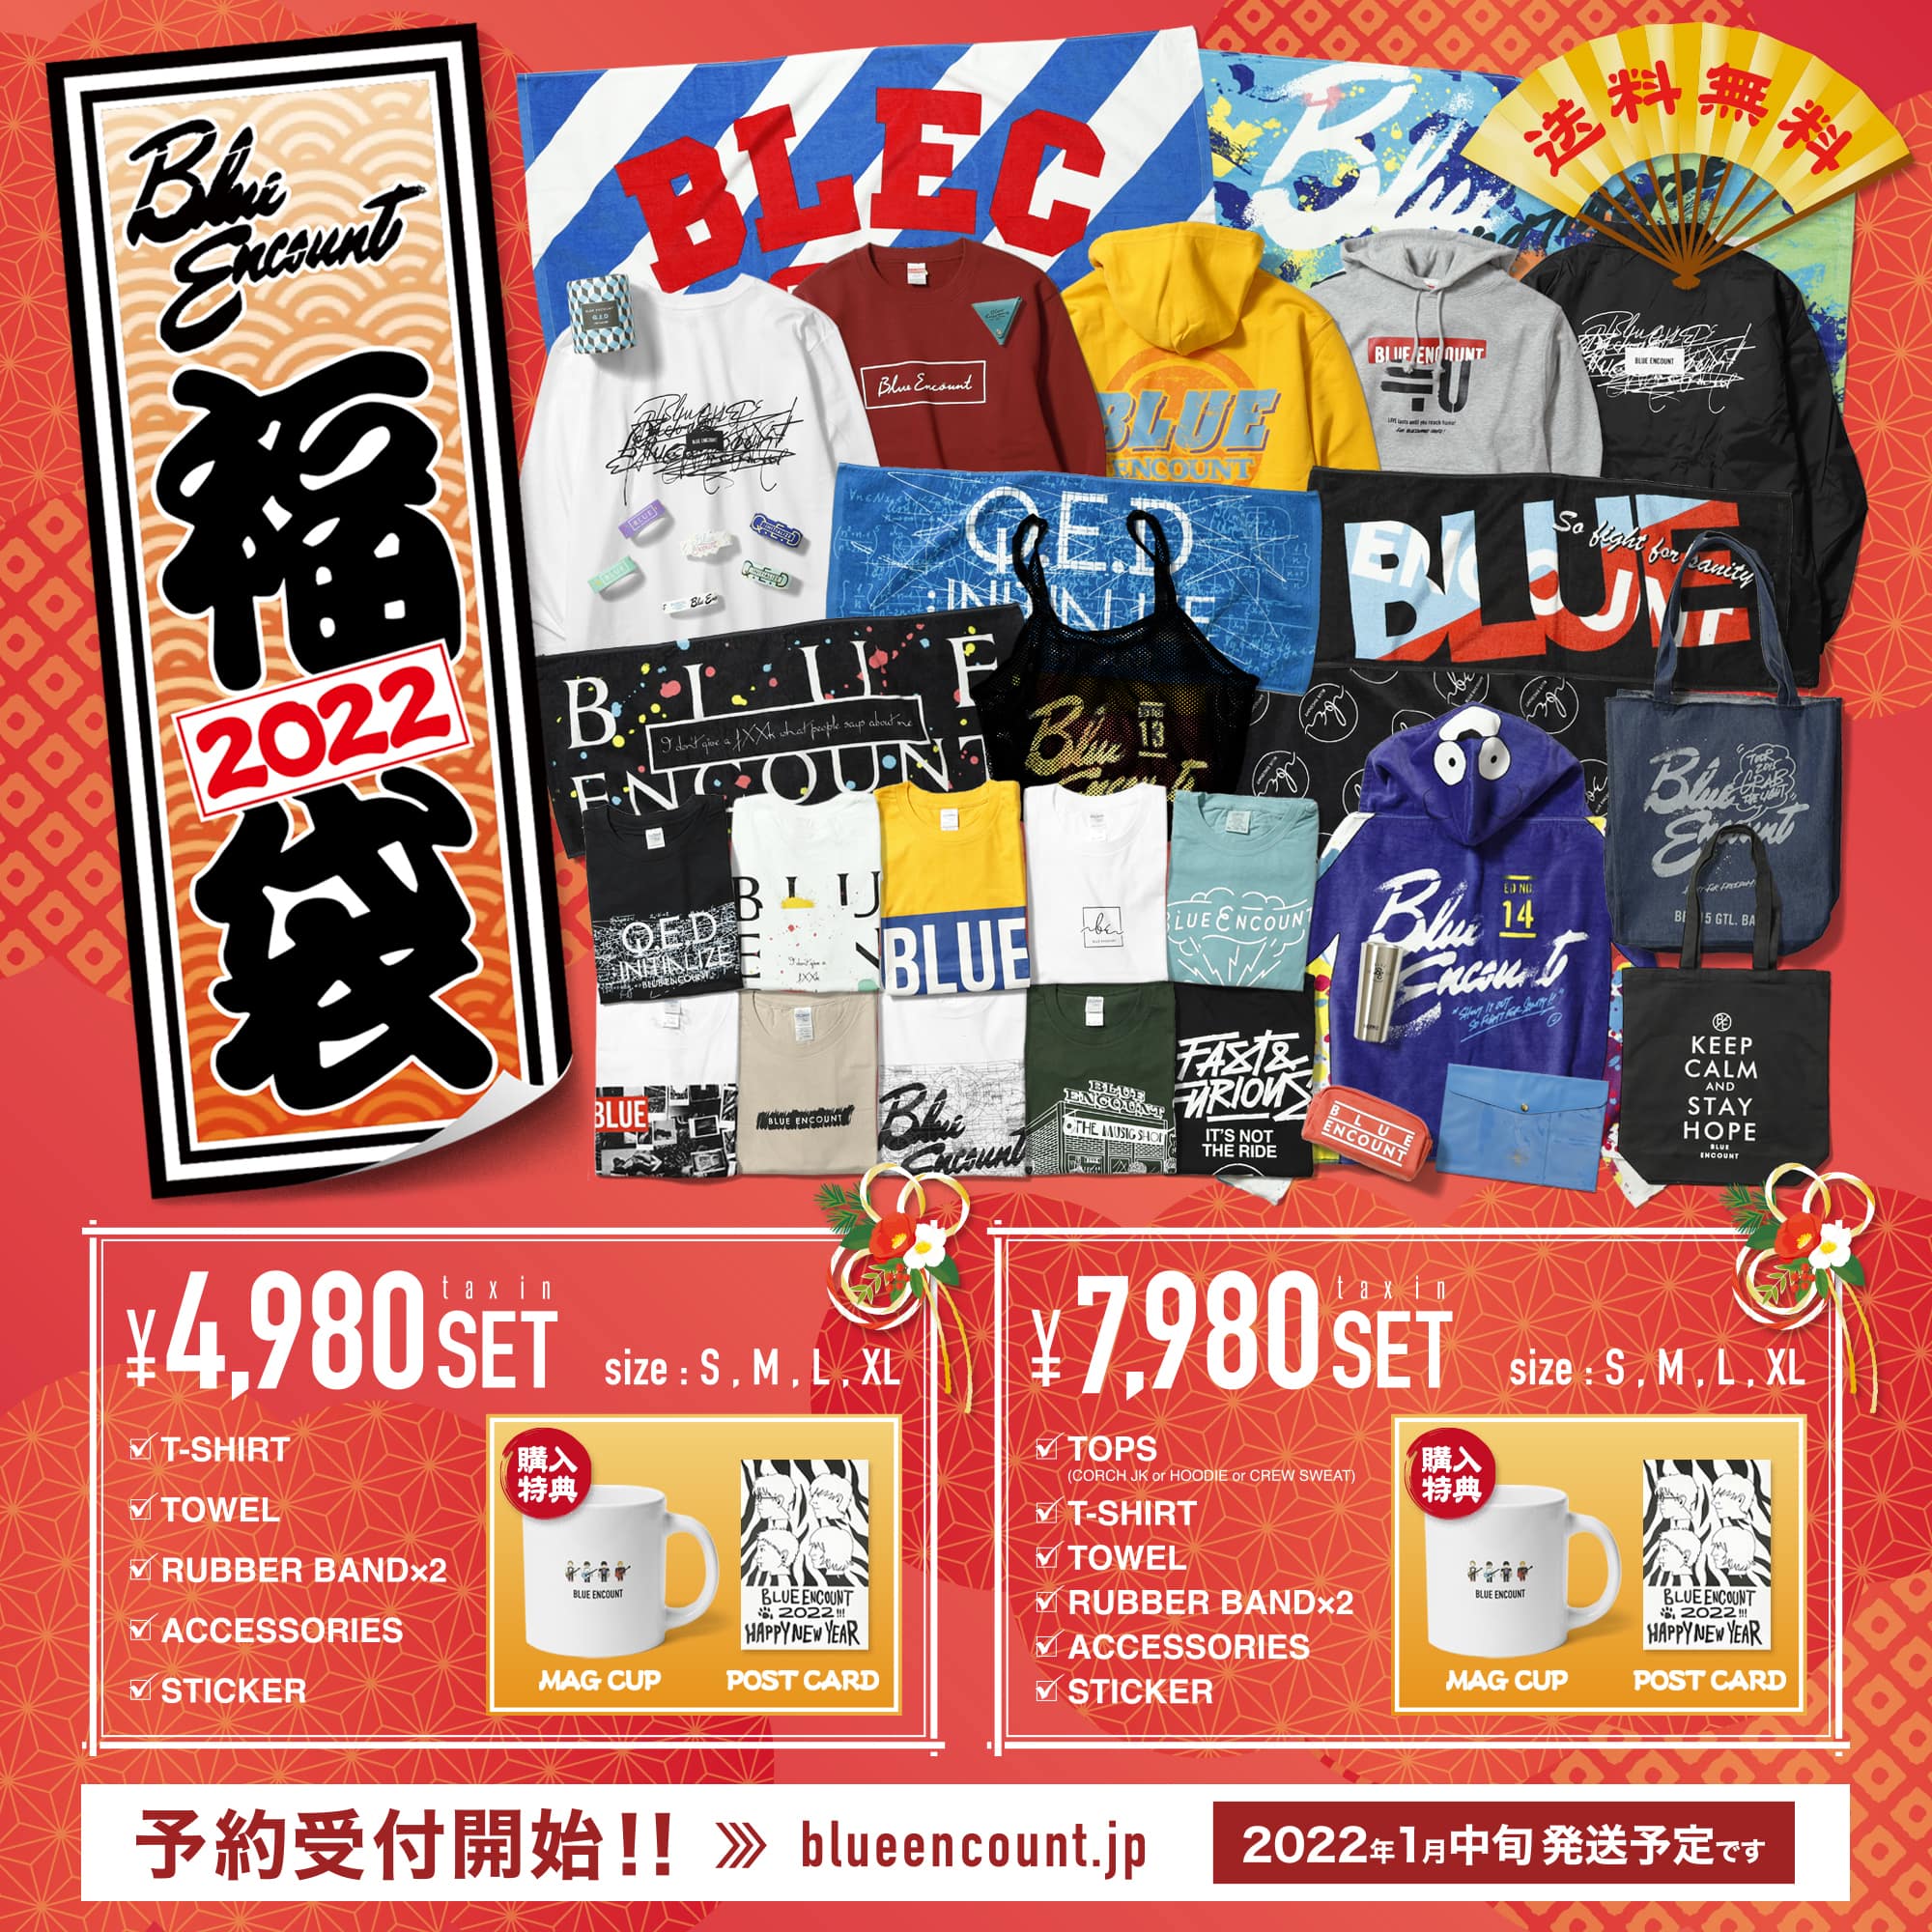 OFFICIAL GOODS STOREにて「福袋」予約受付開始！